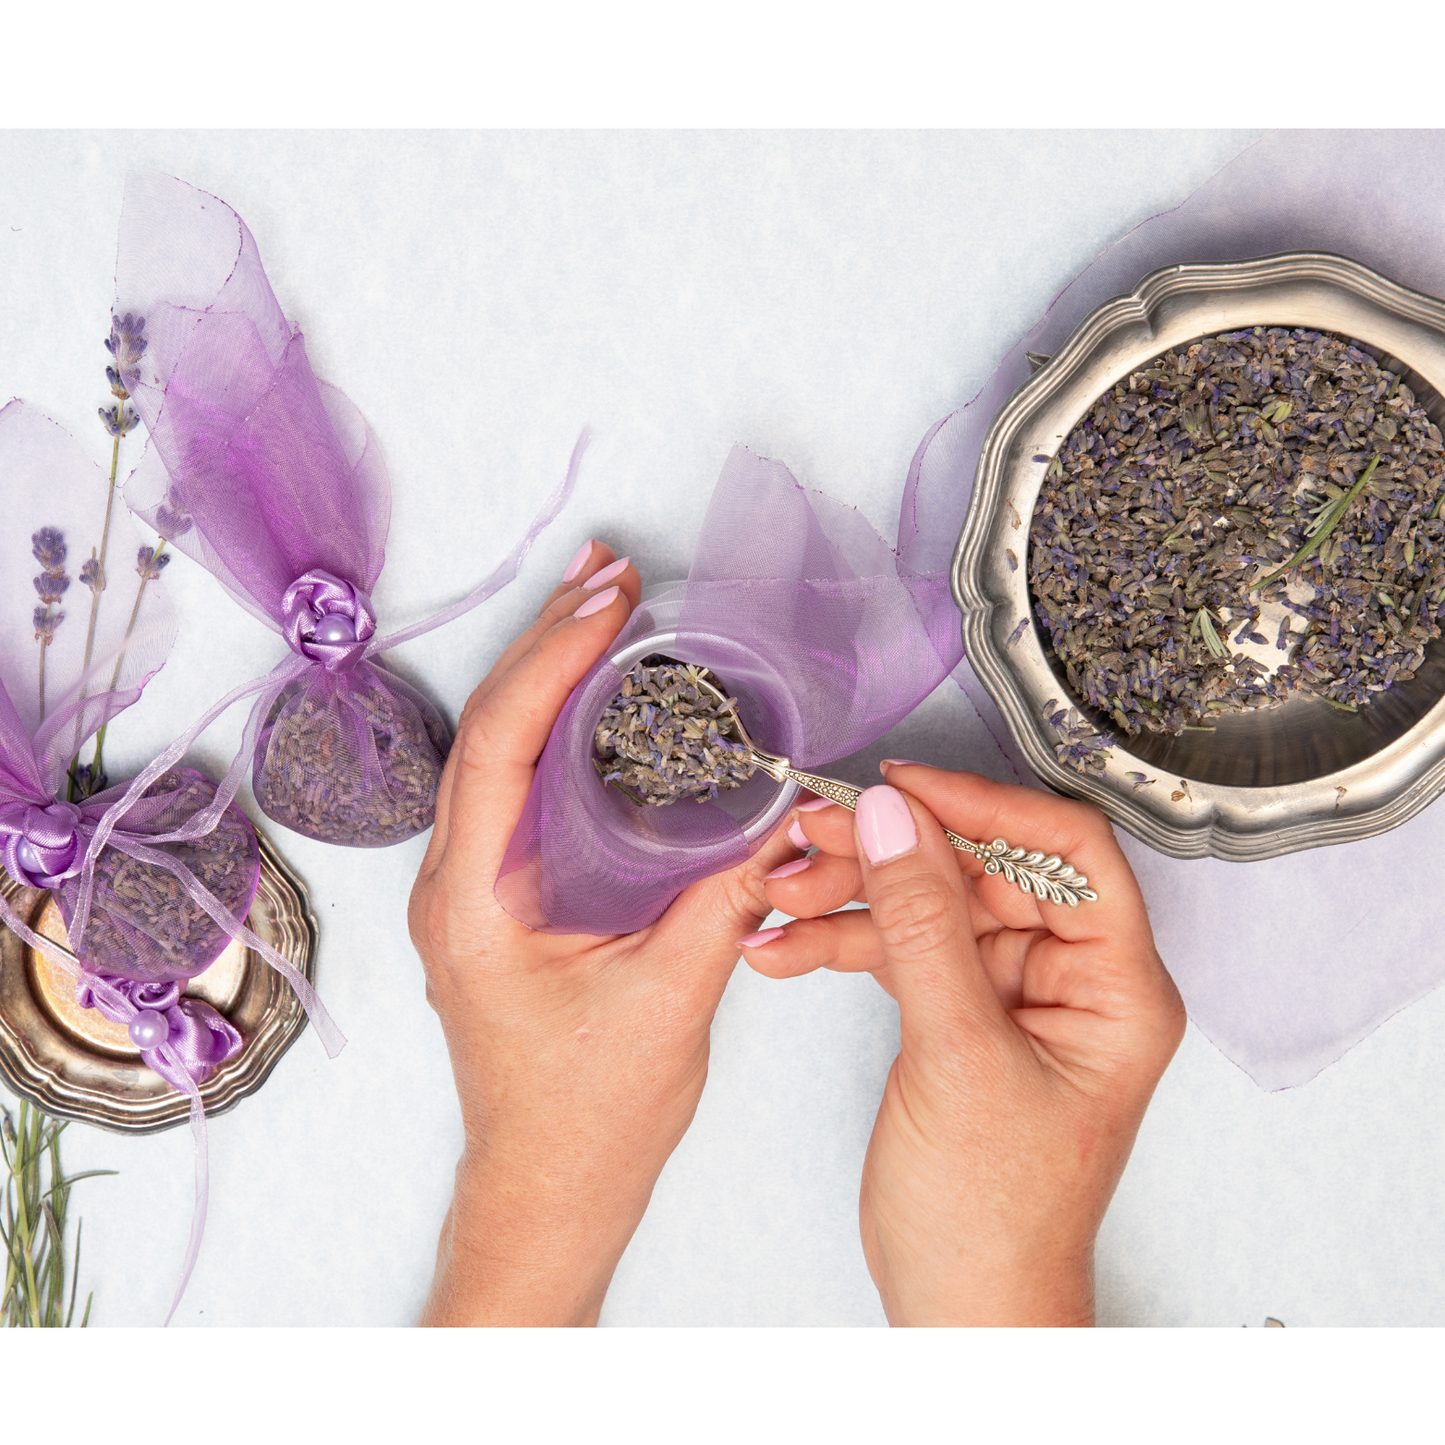 Lavender Flowers For Simmer Pots, Cooking, Crafting, Tea, Relaxation and Sleep Aid